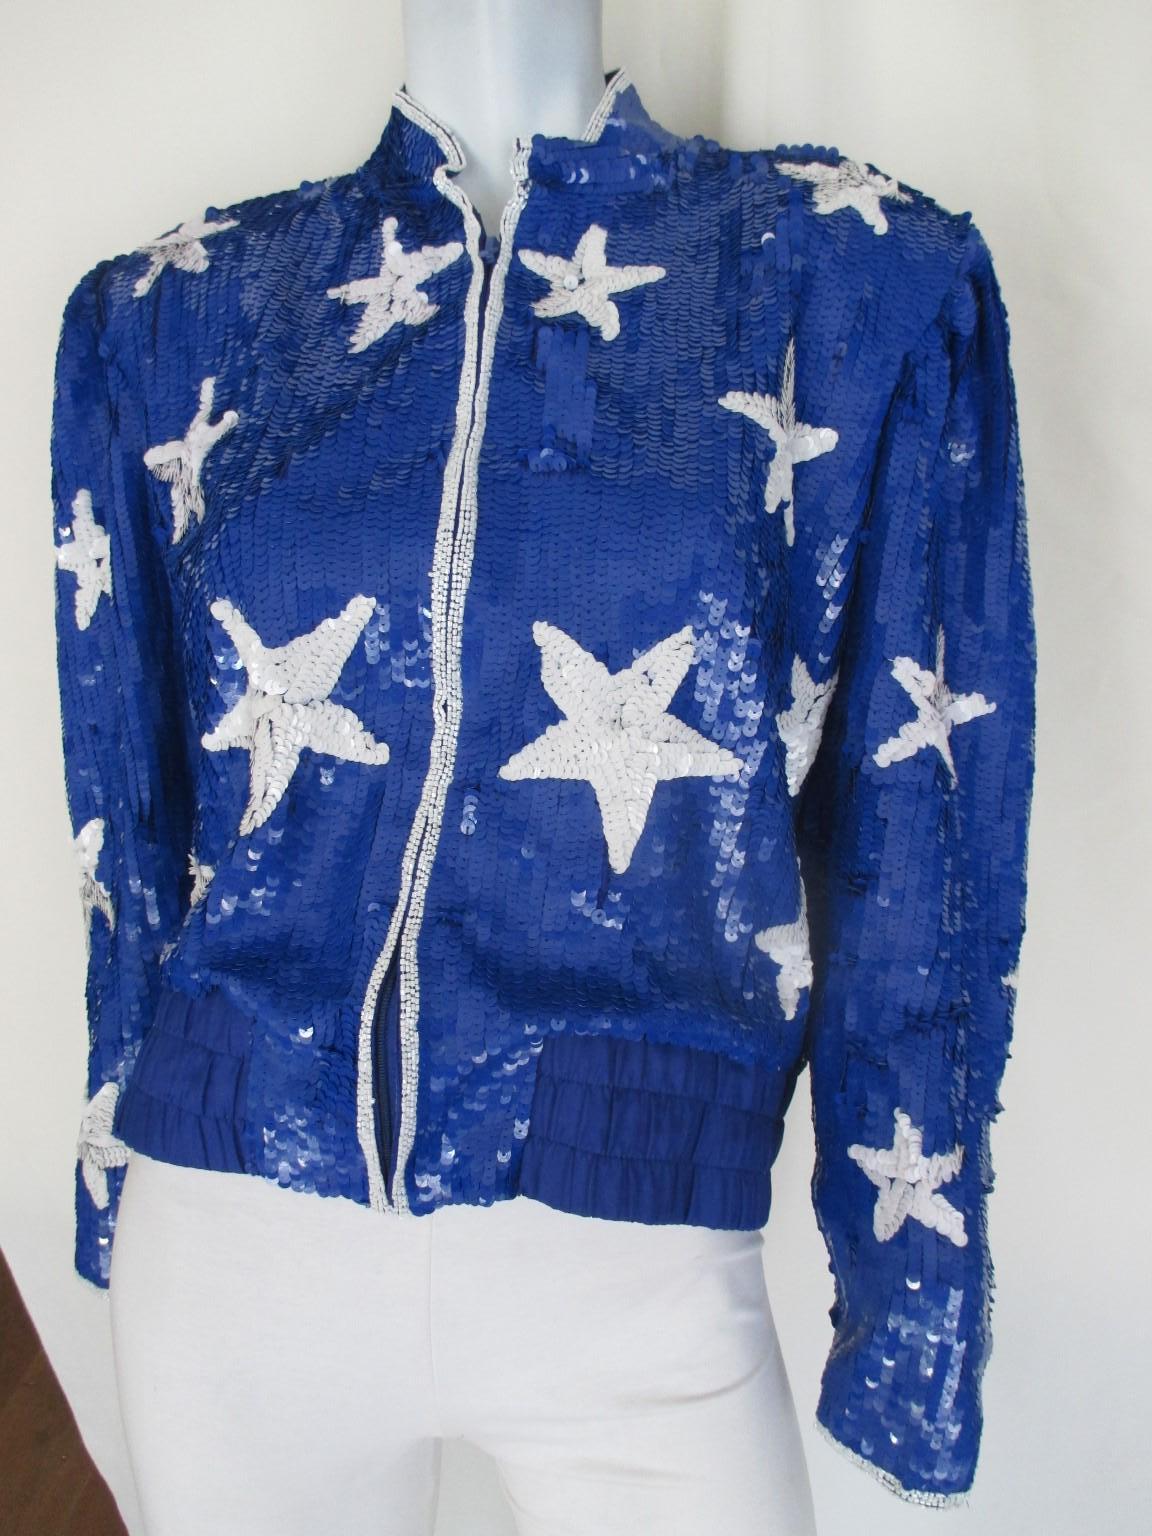 This vintage jacket 1980's  is made of all-over sequins with The American flag and white stars.
It has a zipper , no pockets and is elasticized at hem and fully lined.
The jacket is in good vintage condition
Size fits like a small

Please note that